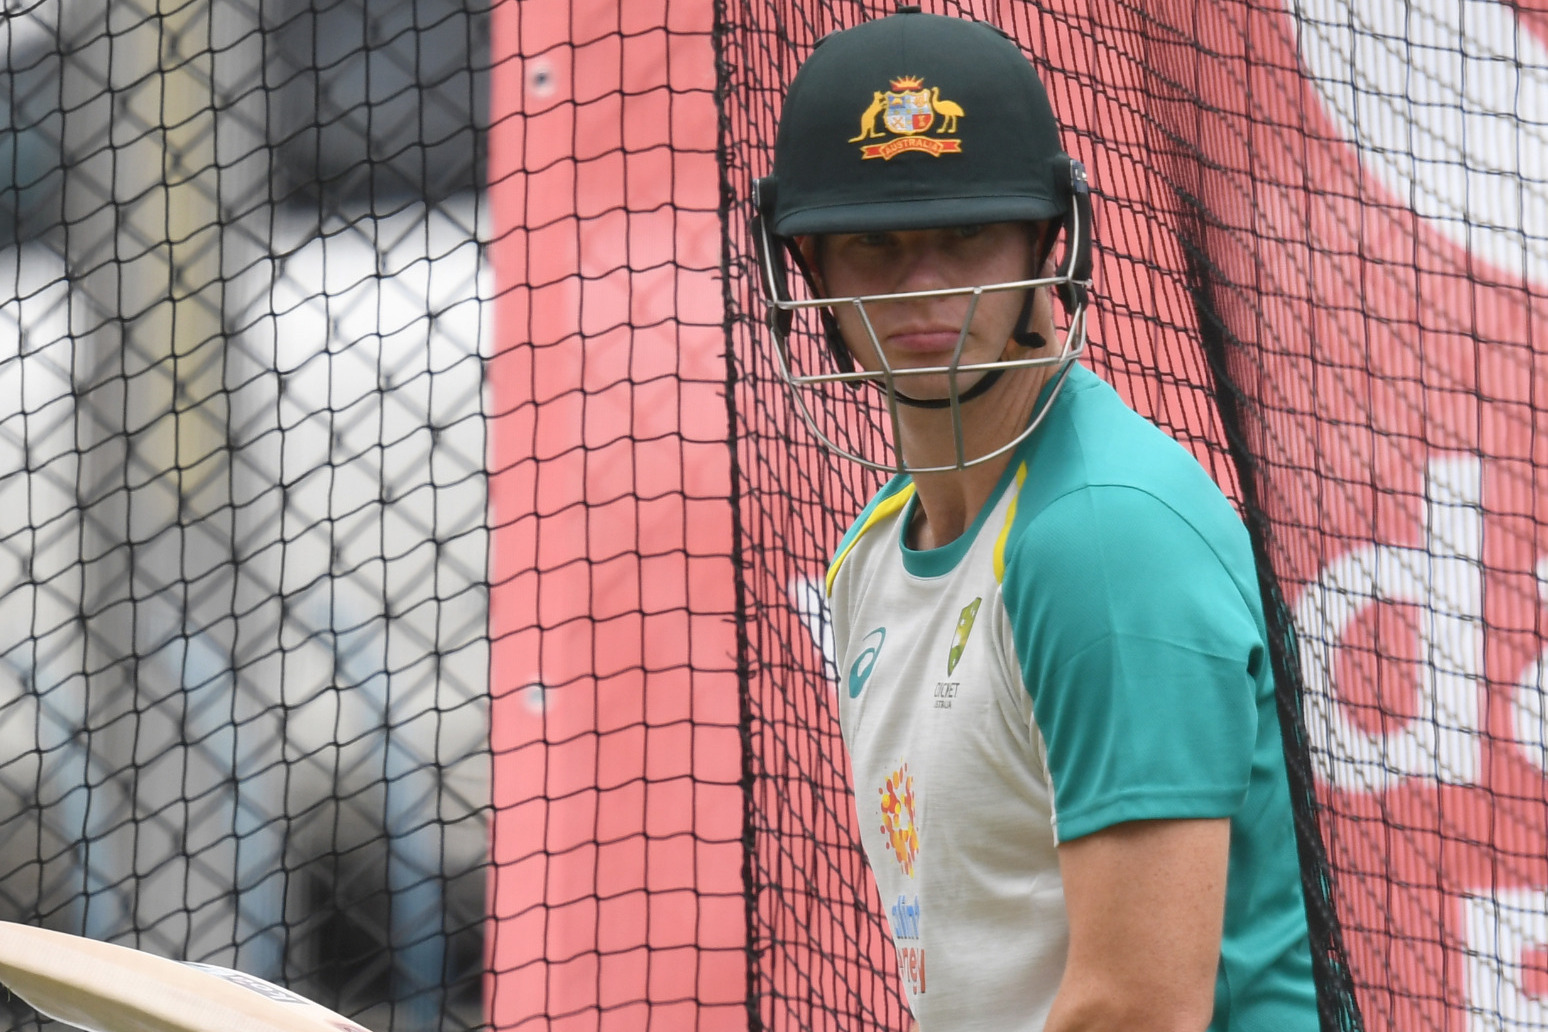 Steve Smith signs up for County Championship spell with Sussex ahead of Ashes 